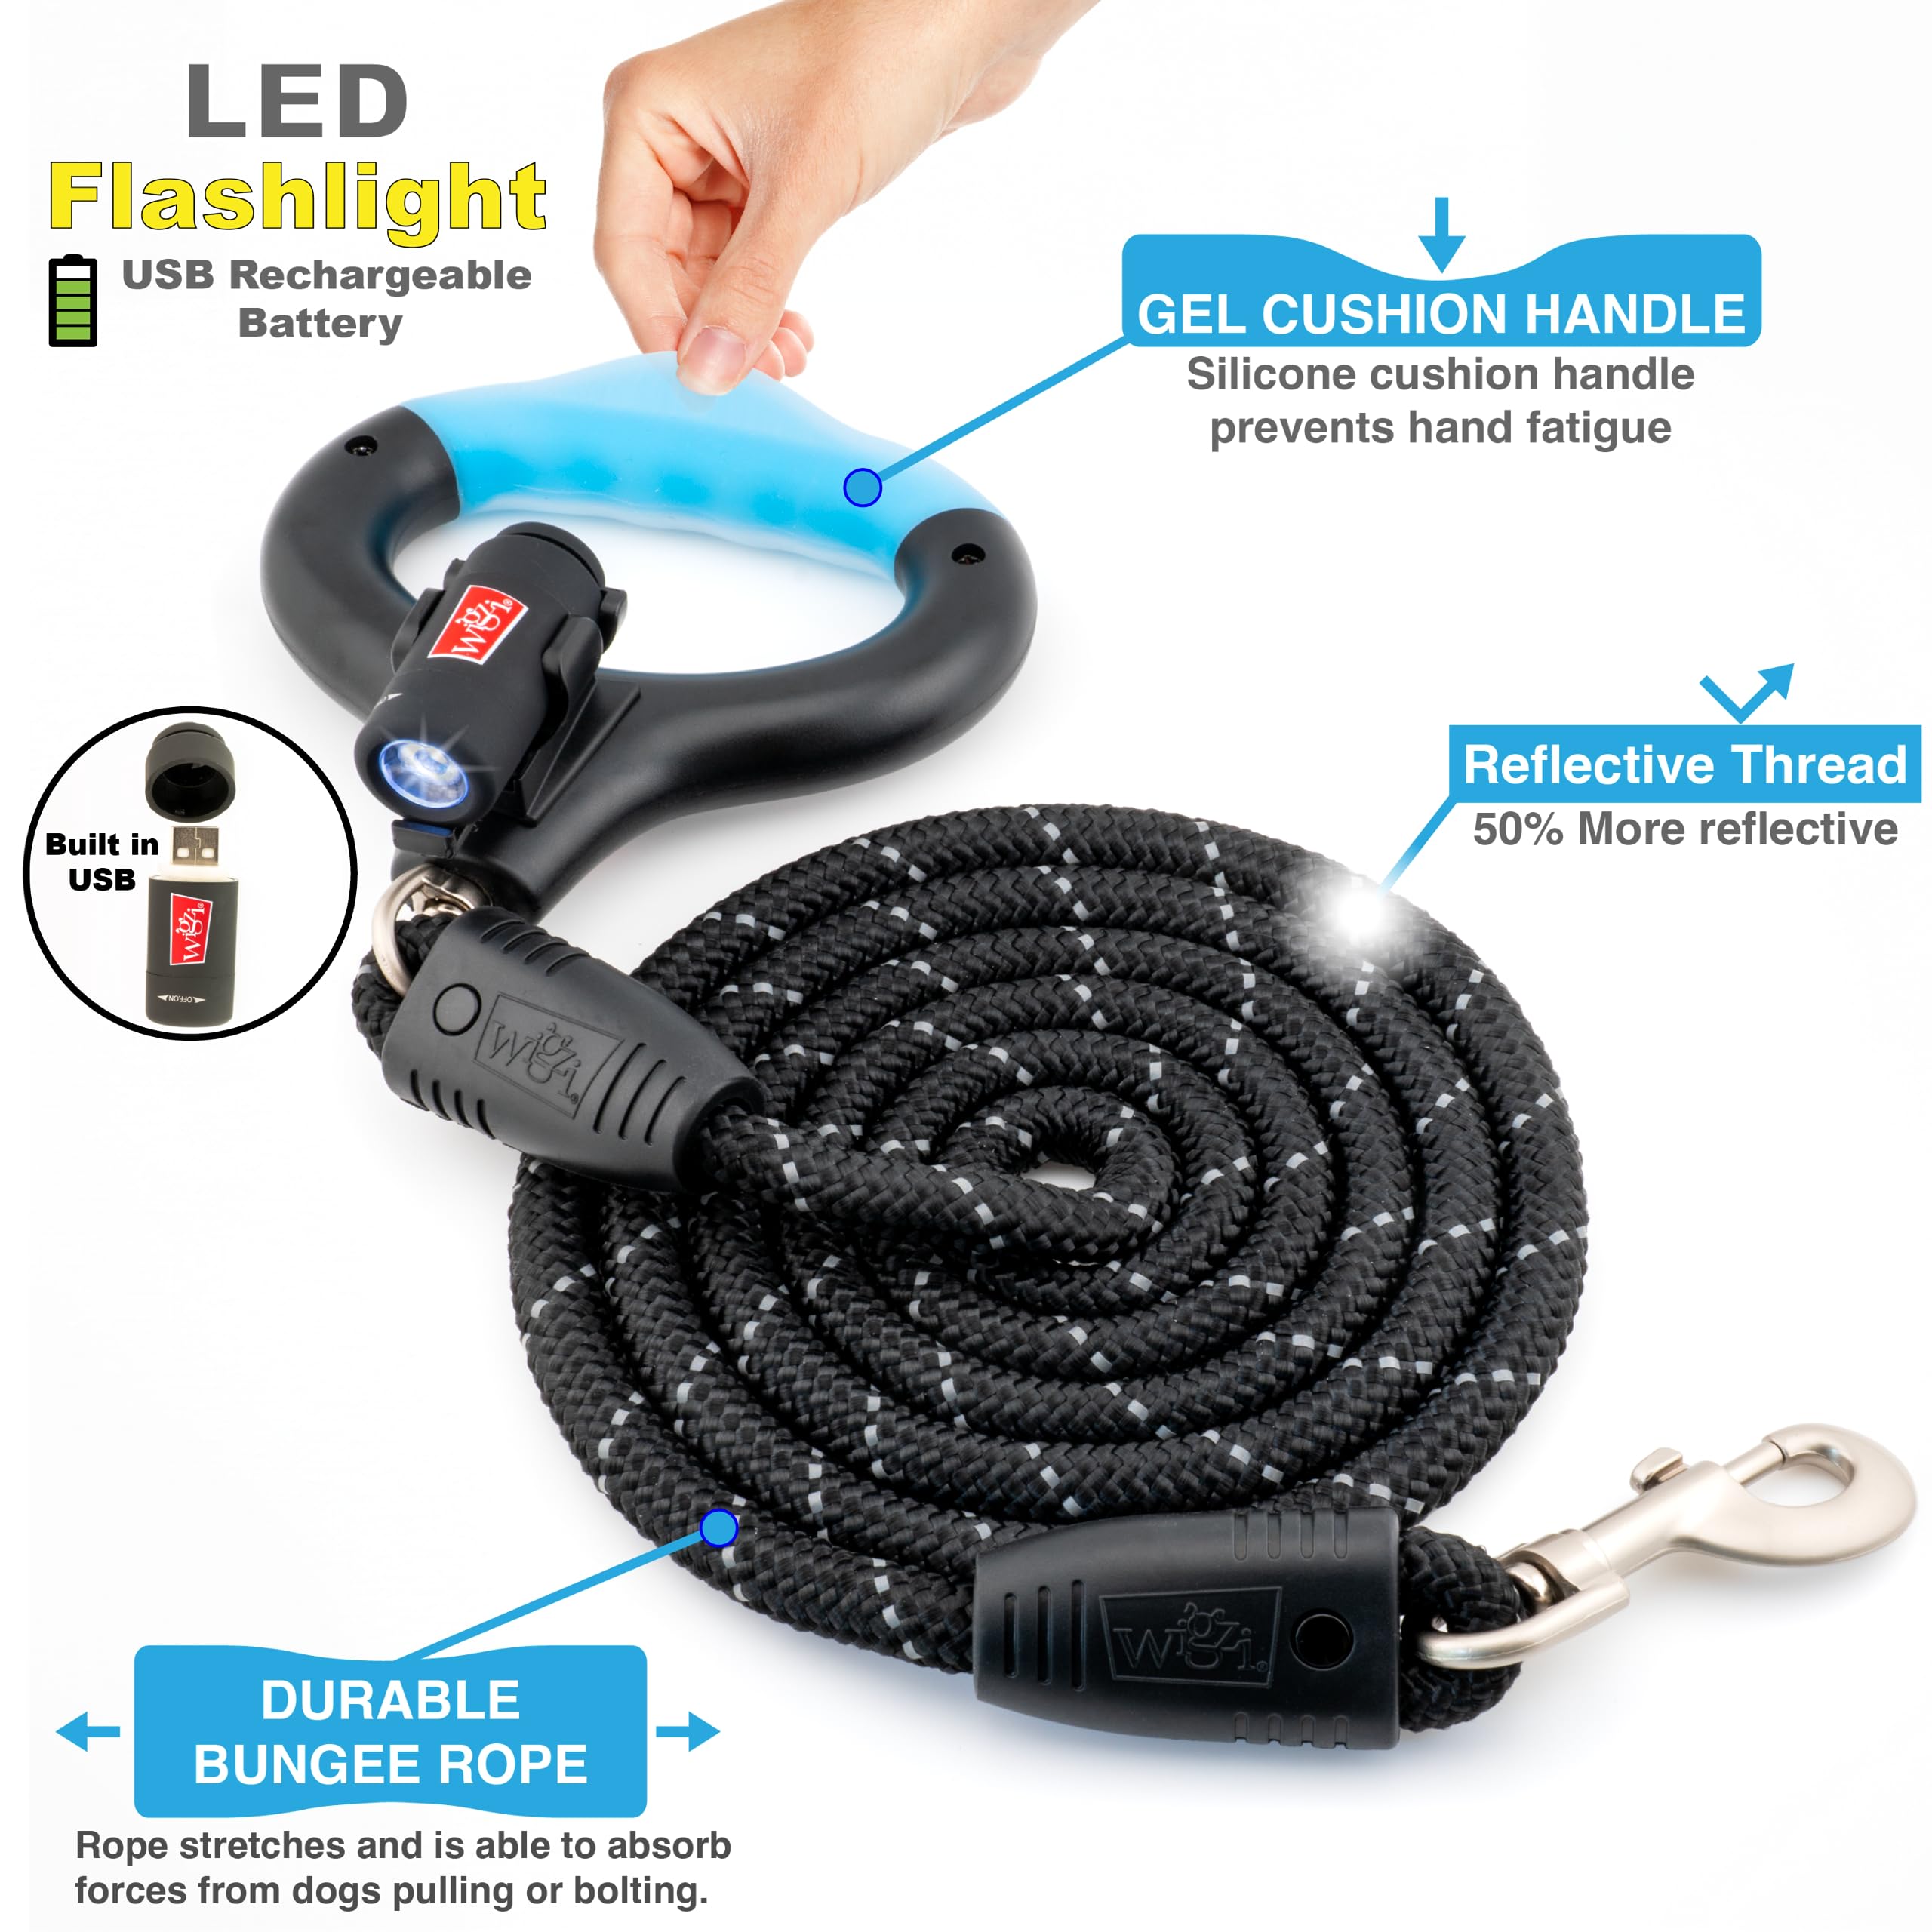 Wigzi Luna LED Lighting and Reflective Gel Handle Grip Cable Dog Leash - Red - 6 Feet  